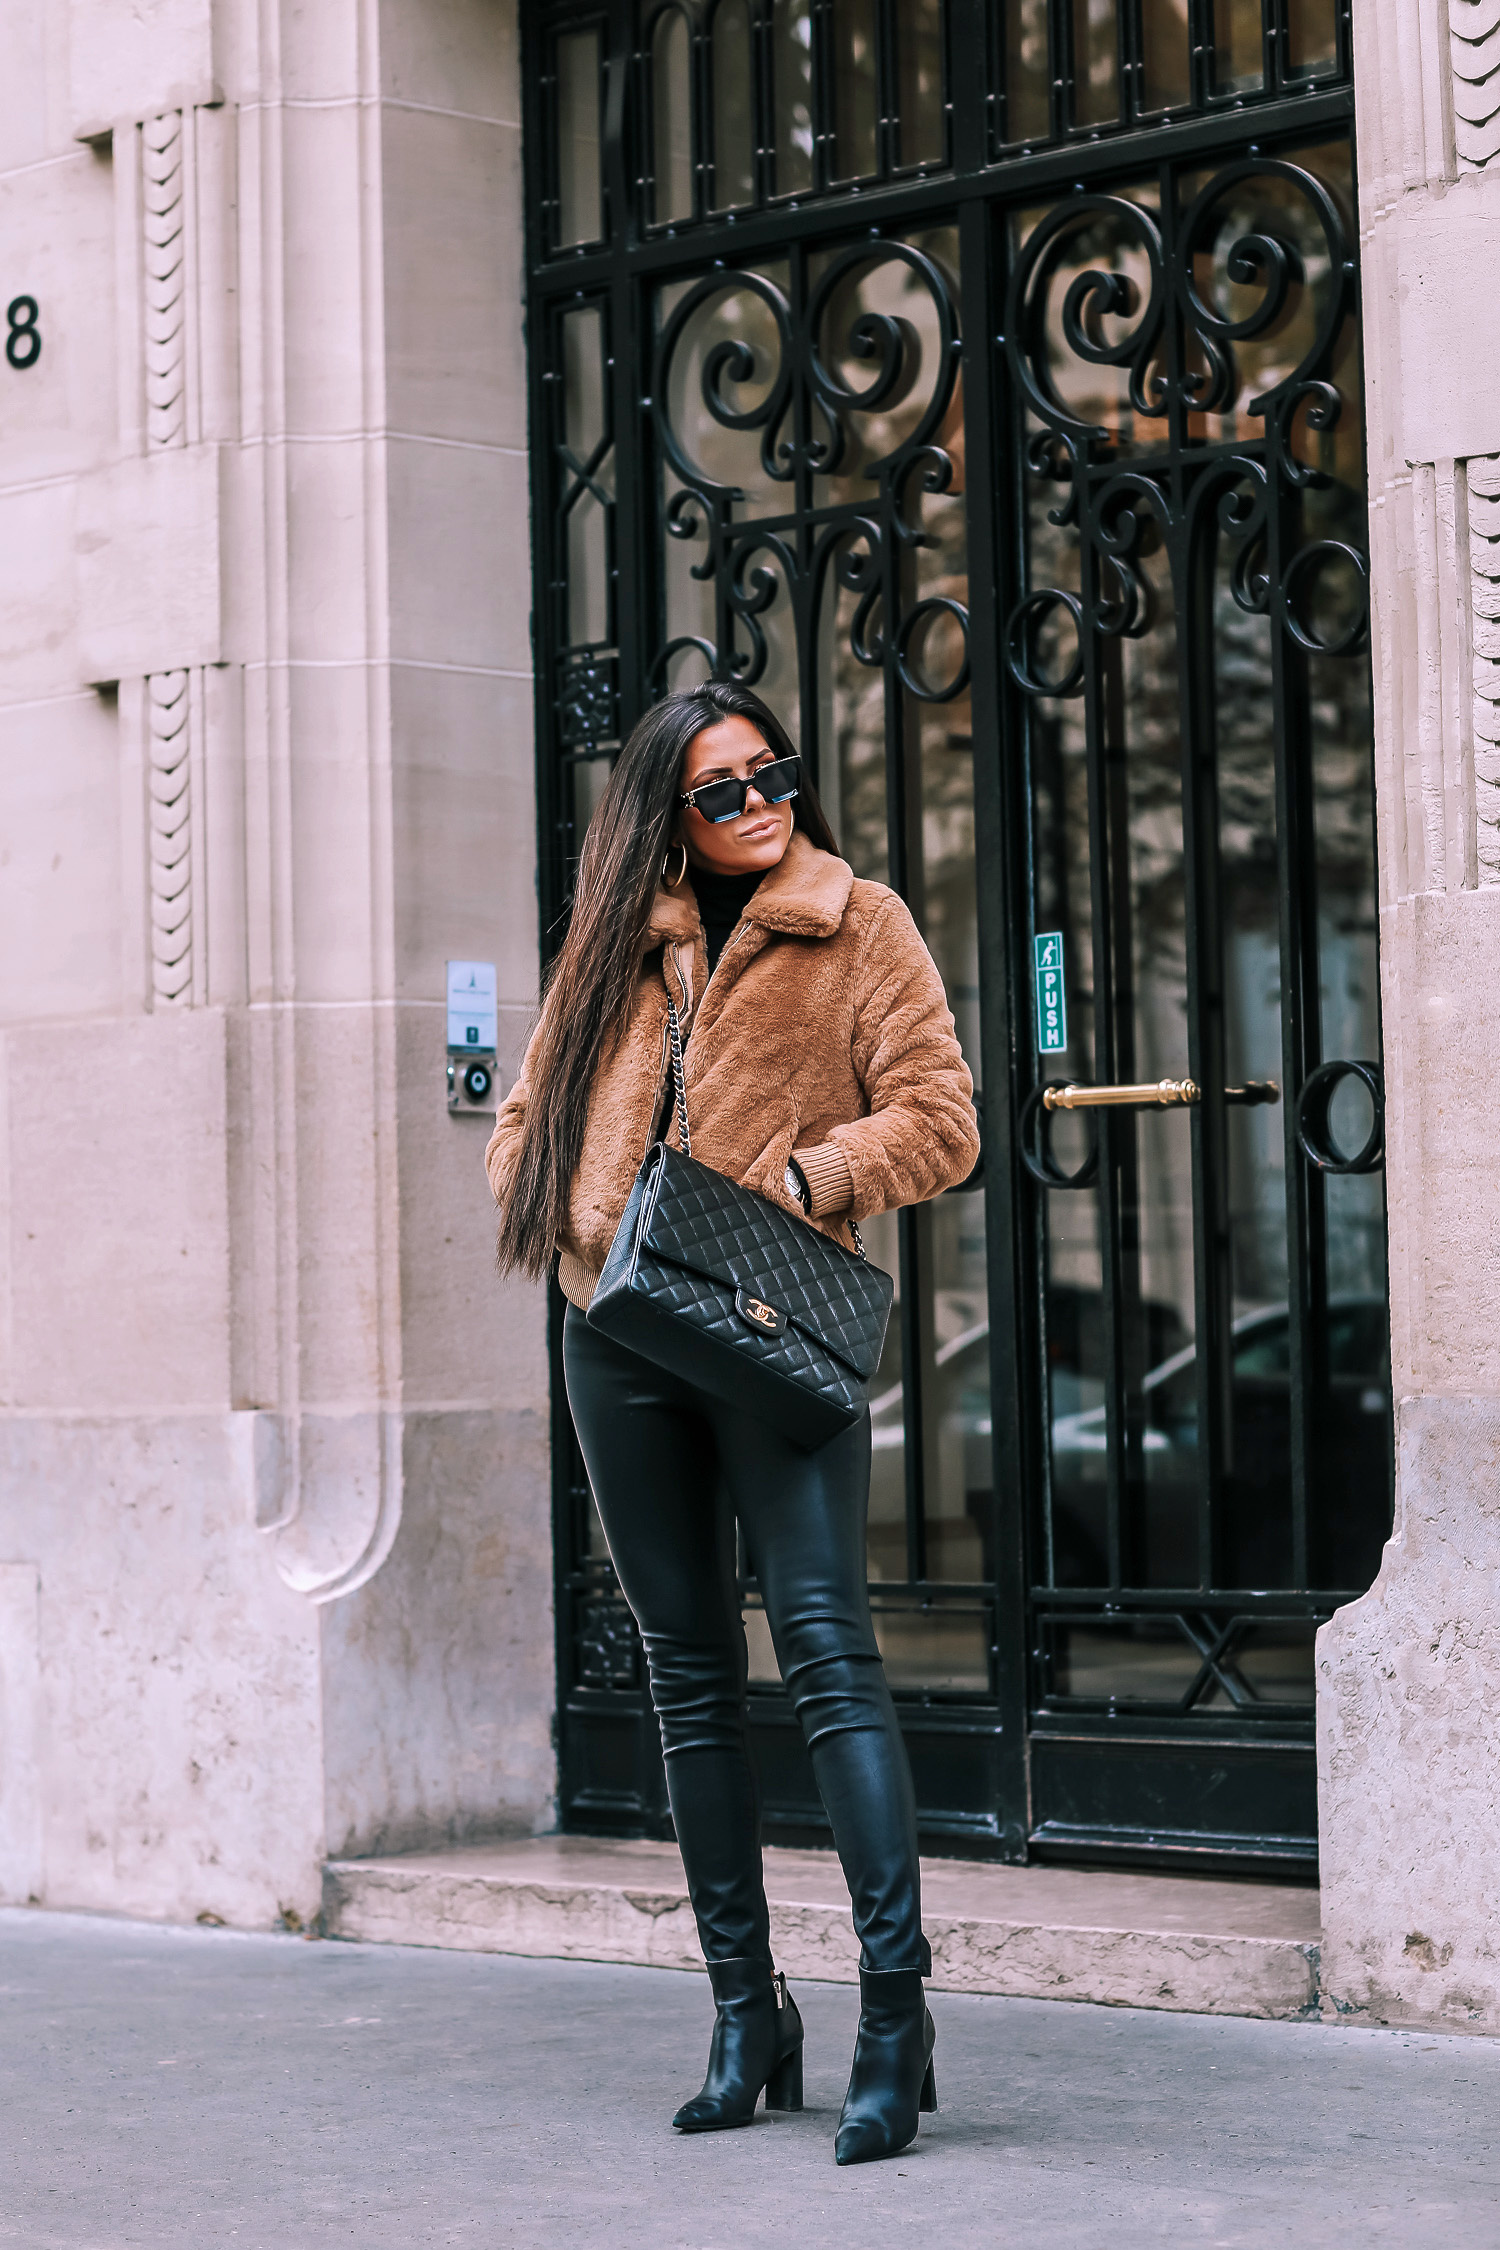 paris fall fashion 2019, fall fashion 2019, banana republic fall outfits 2019, paris outfit ideas fall and winter, what to wear in paris in october november, emily ann gemma-2 | Do You Like Neon Or Neutrals?! Two Everyday Fall Outfits by popular Oklahoma fashion blog, The Sweetest Thing: image of a woman outside in Paris and wearing a Banana Republic Faux Fur Bomber, Banana Republic Merino-Blend Funnel-Neck Sweater, and Banana Republic High-Rise Skinny Coated Jean.